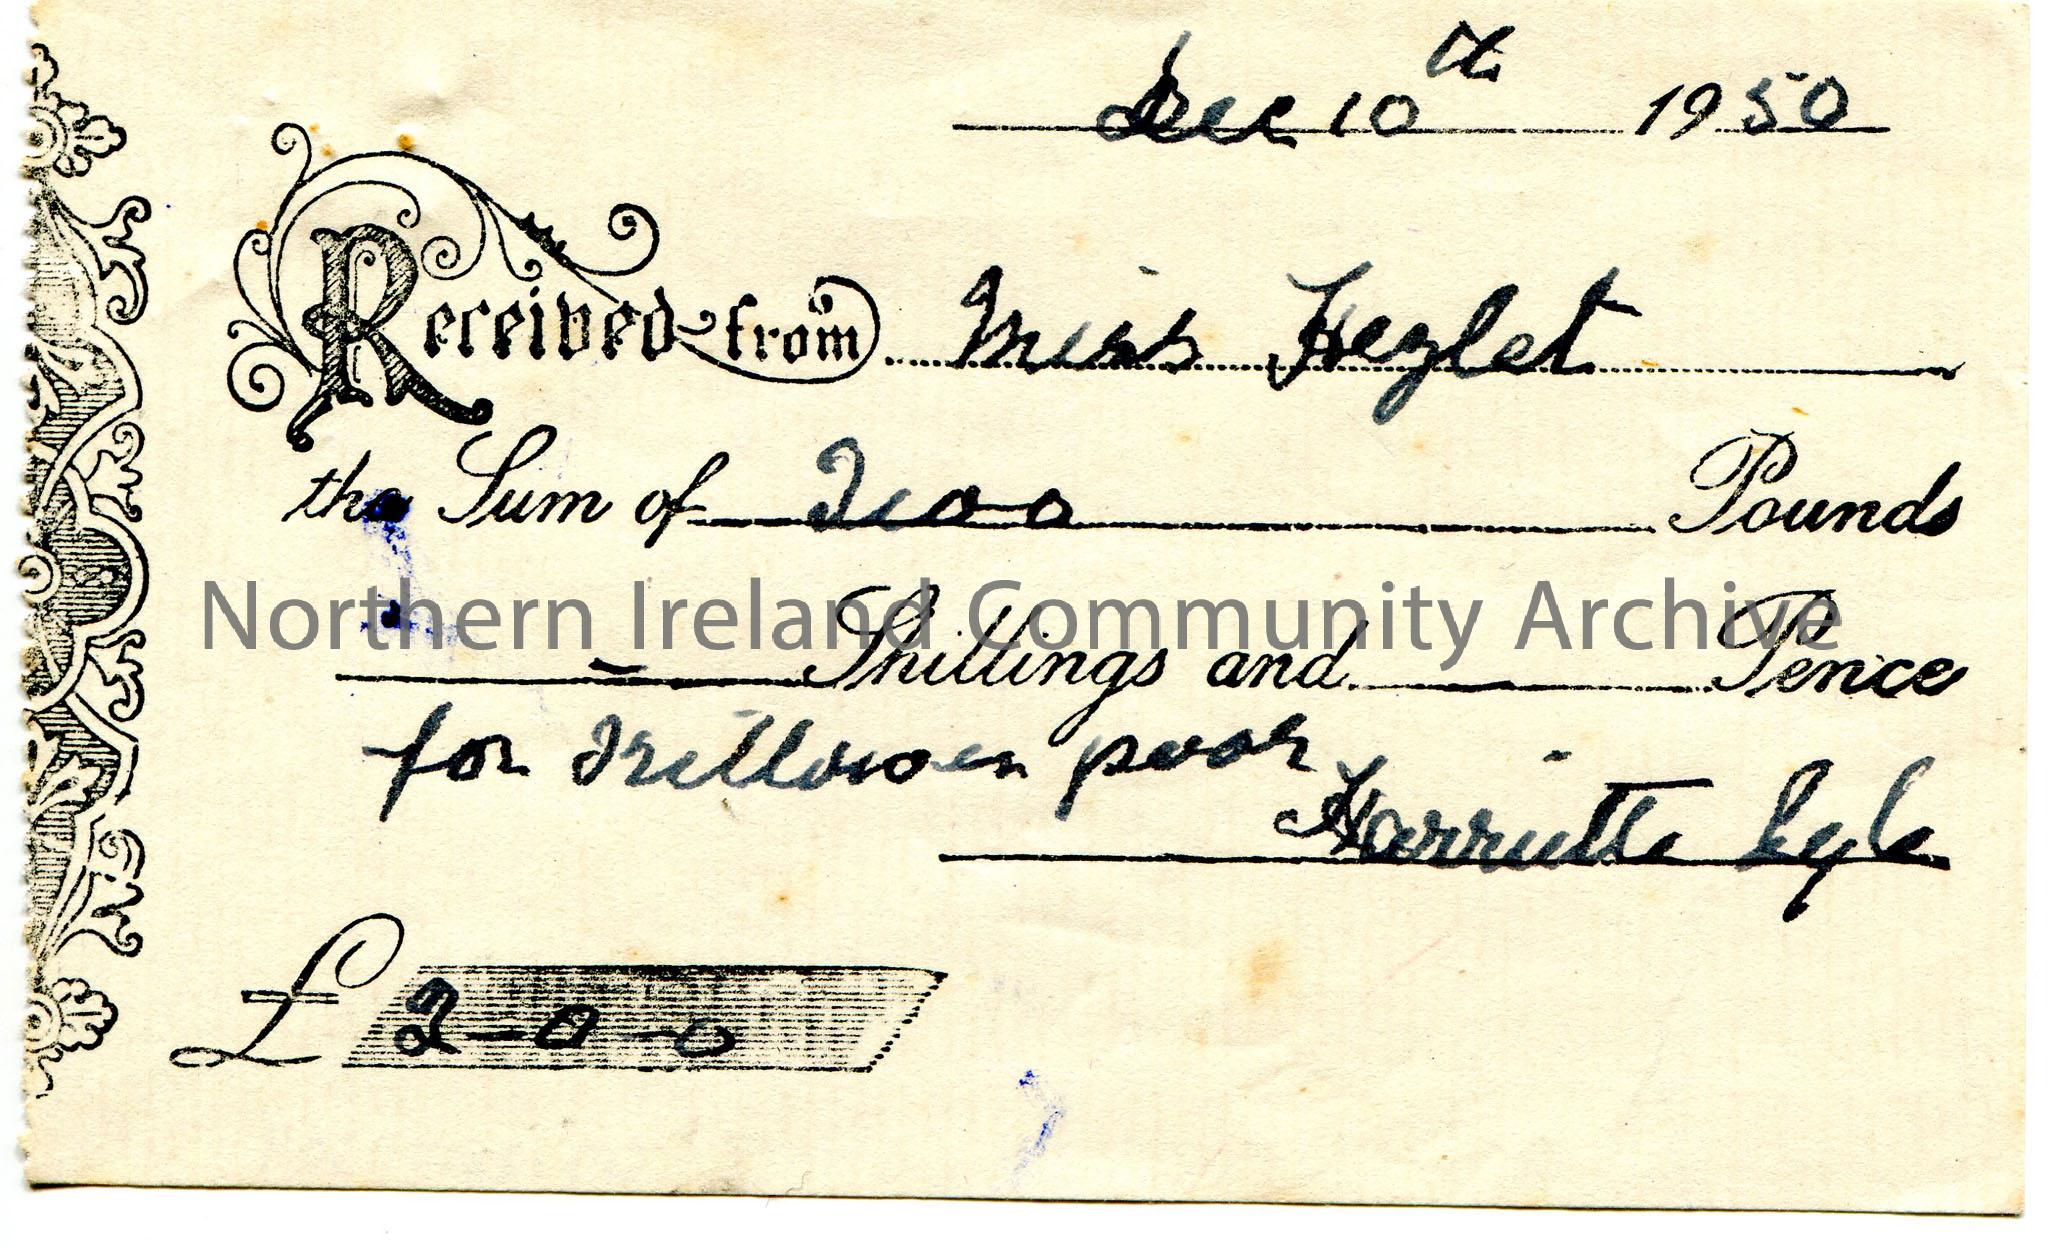 Handwritten receipt for Miss Hezlet for the sum of £2.0.0 from Harriette Lyle for Killowen poor. Dated 10th December, 1950.